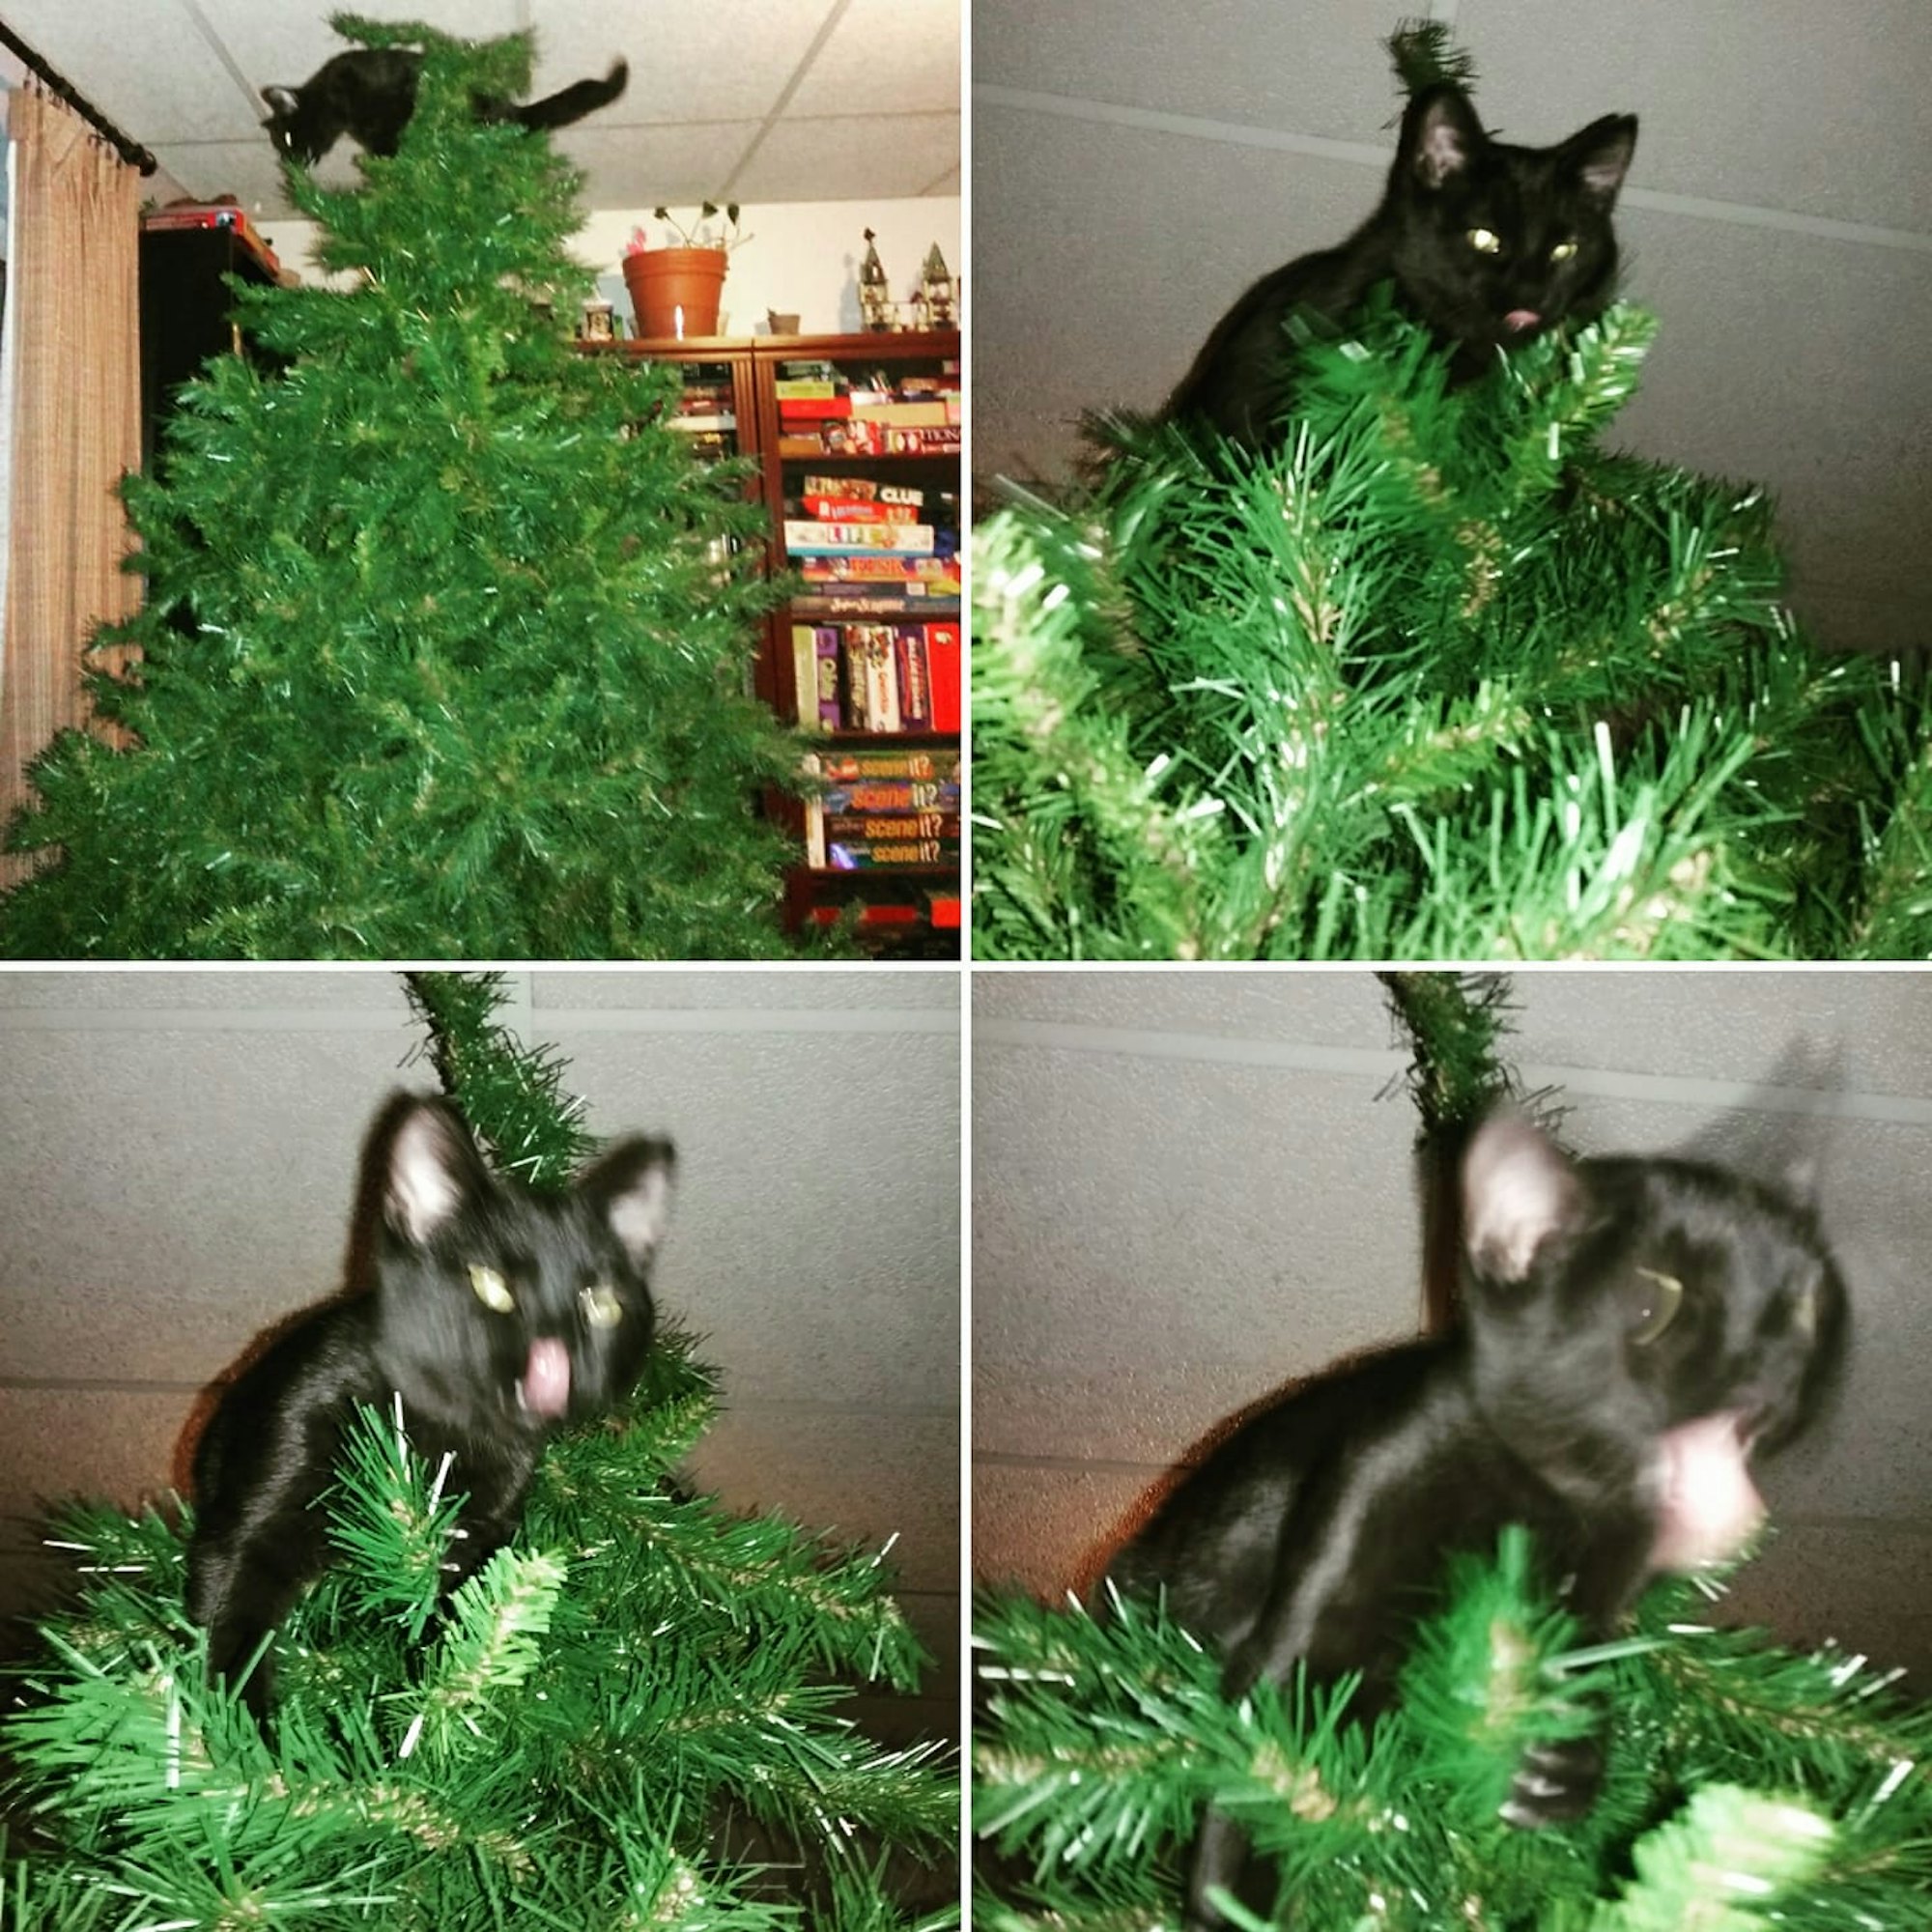 Why Do Cats Like Christmas Trees A Scientist Explains